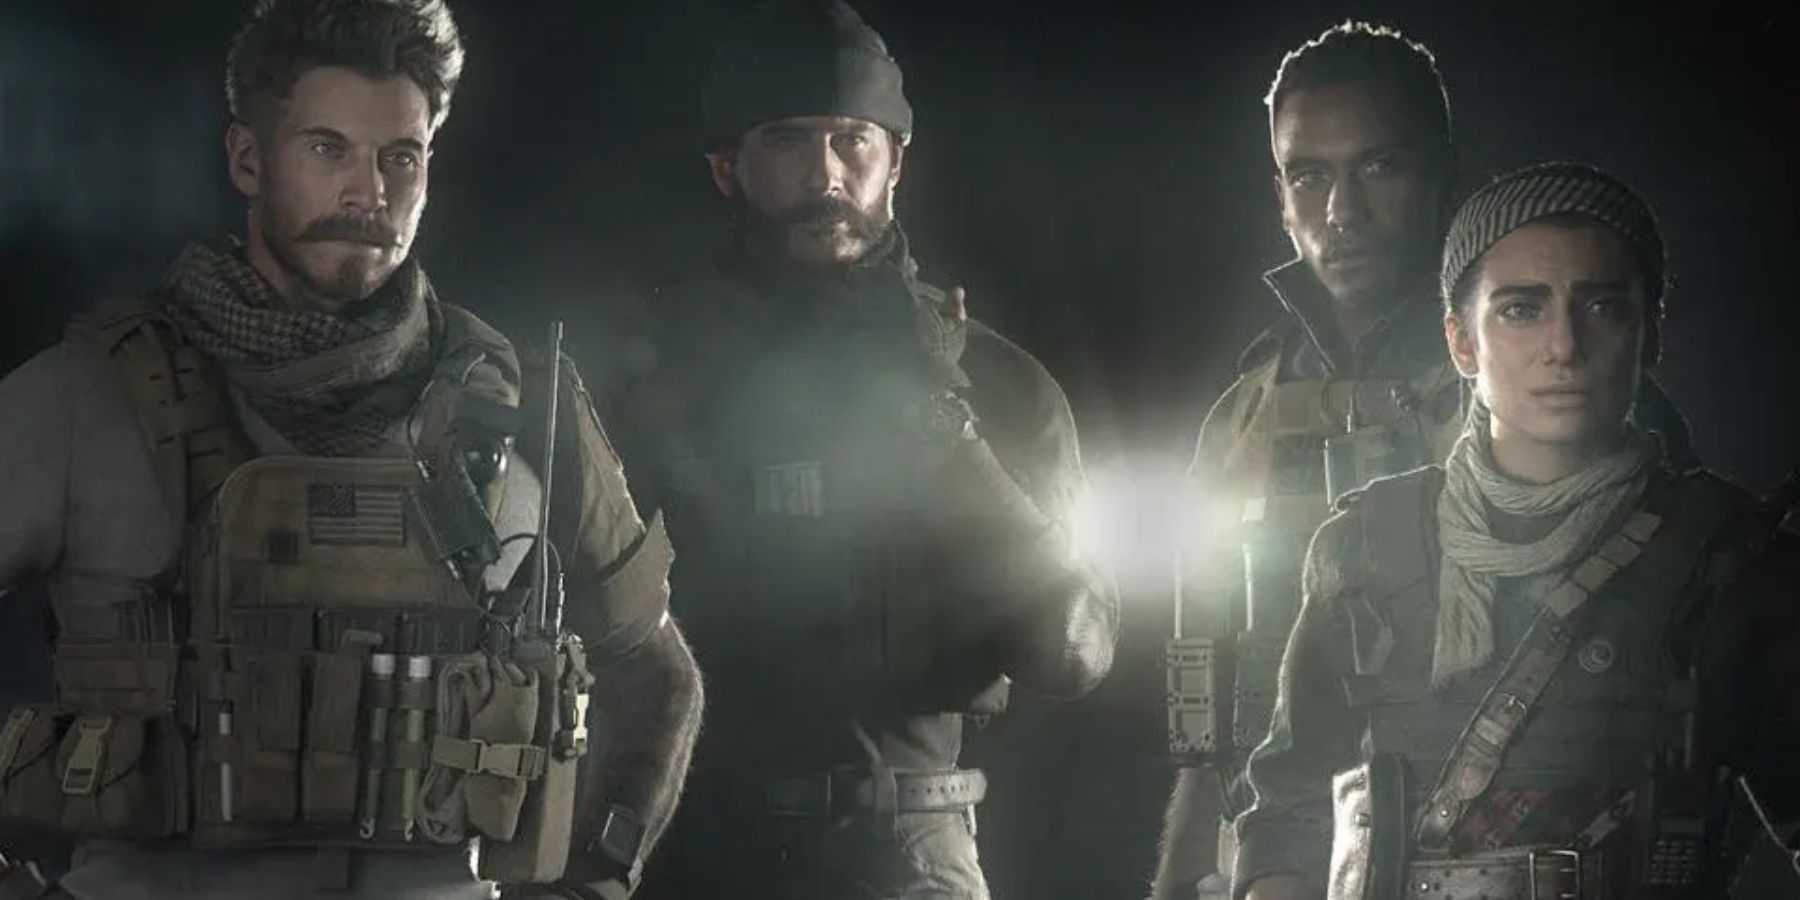 Is Alex in the Modern Warfare 2 campaign story?